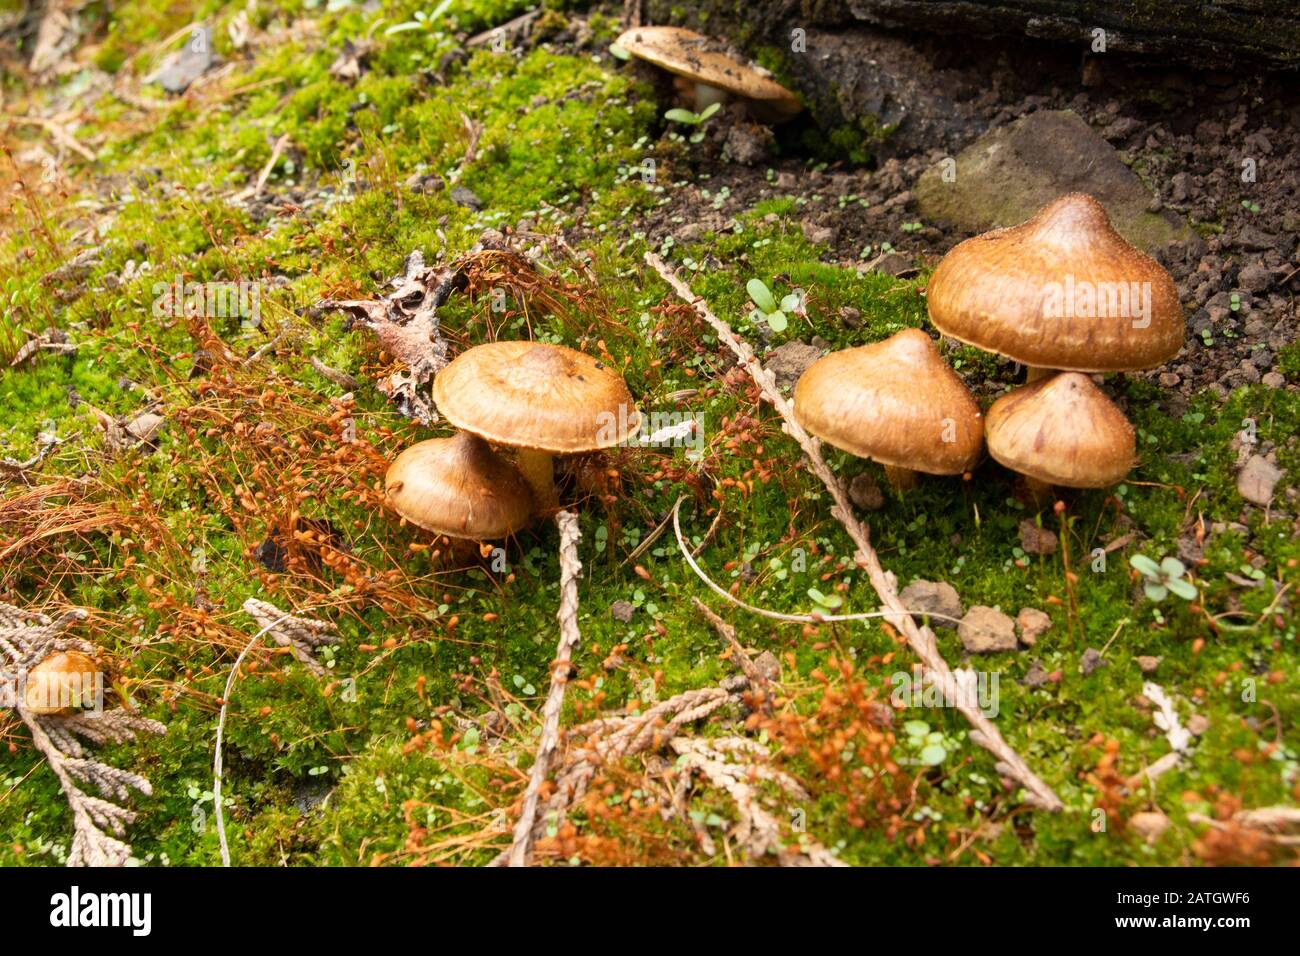 Inocybe cf. lacera. Torn Fibrecap mushrooms, growing in moss, under mixed deciduous and conifer trees, along Bull River, in Sanders County, Montana. Stock Photo